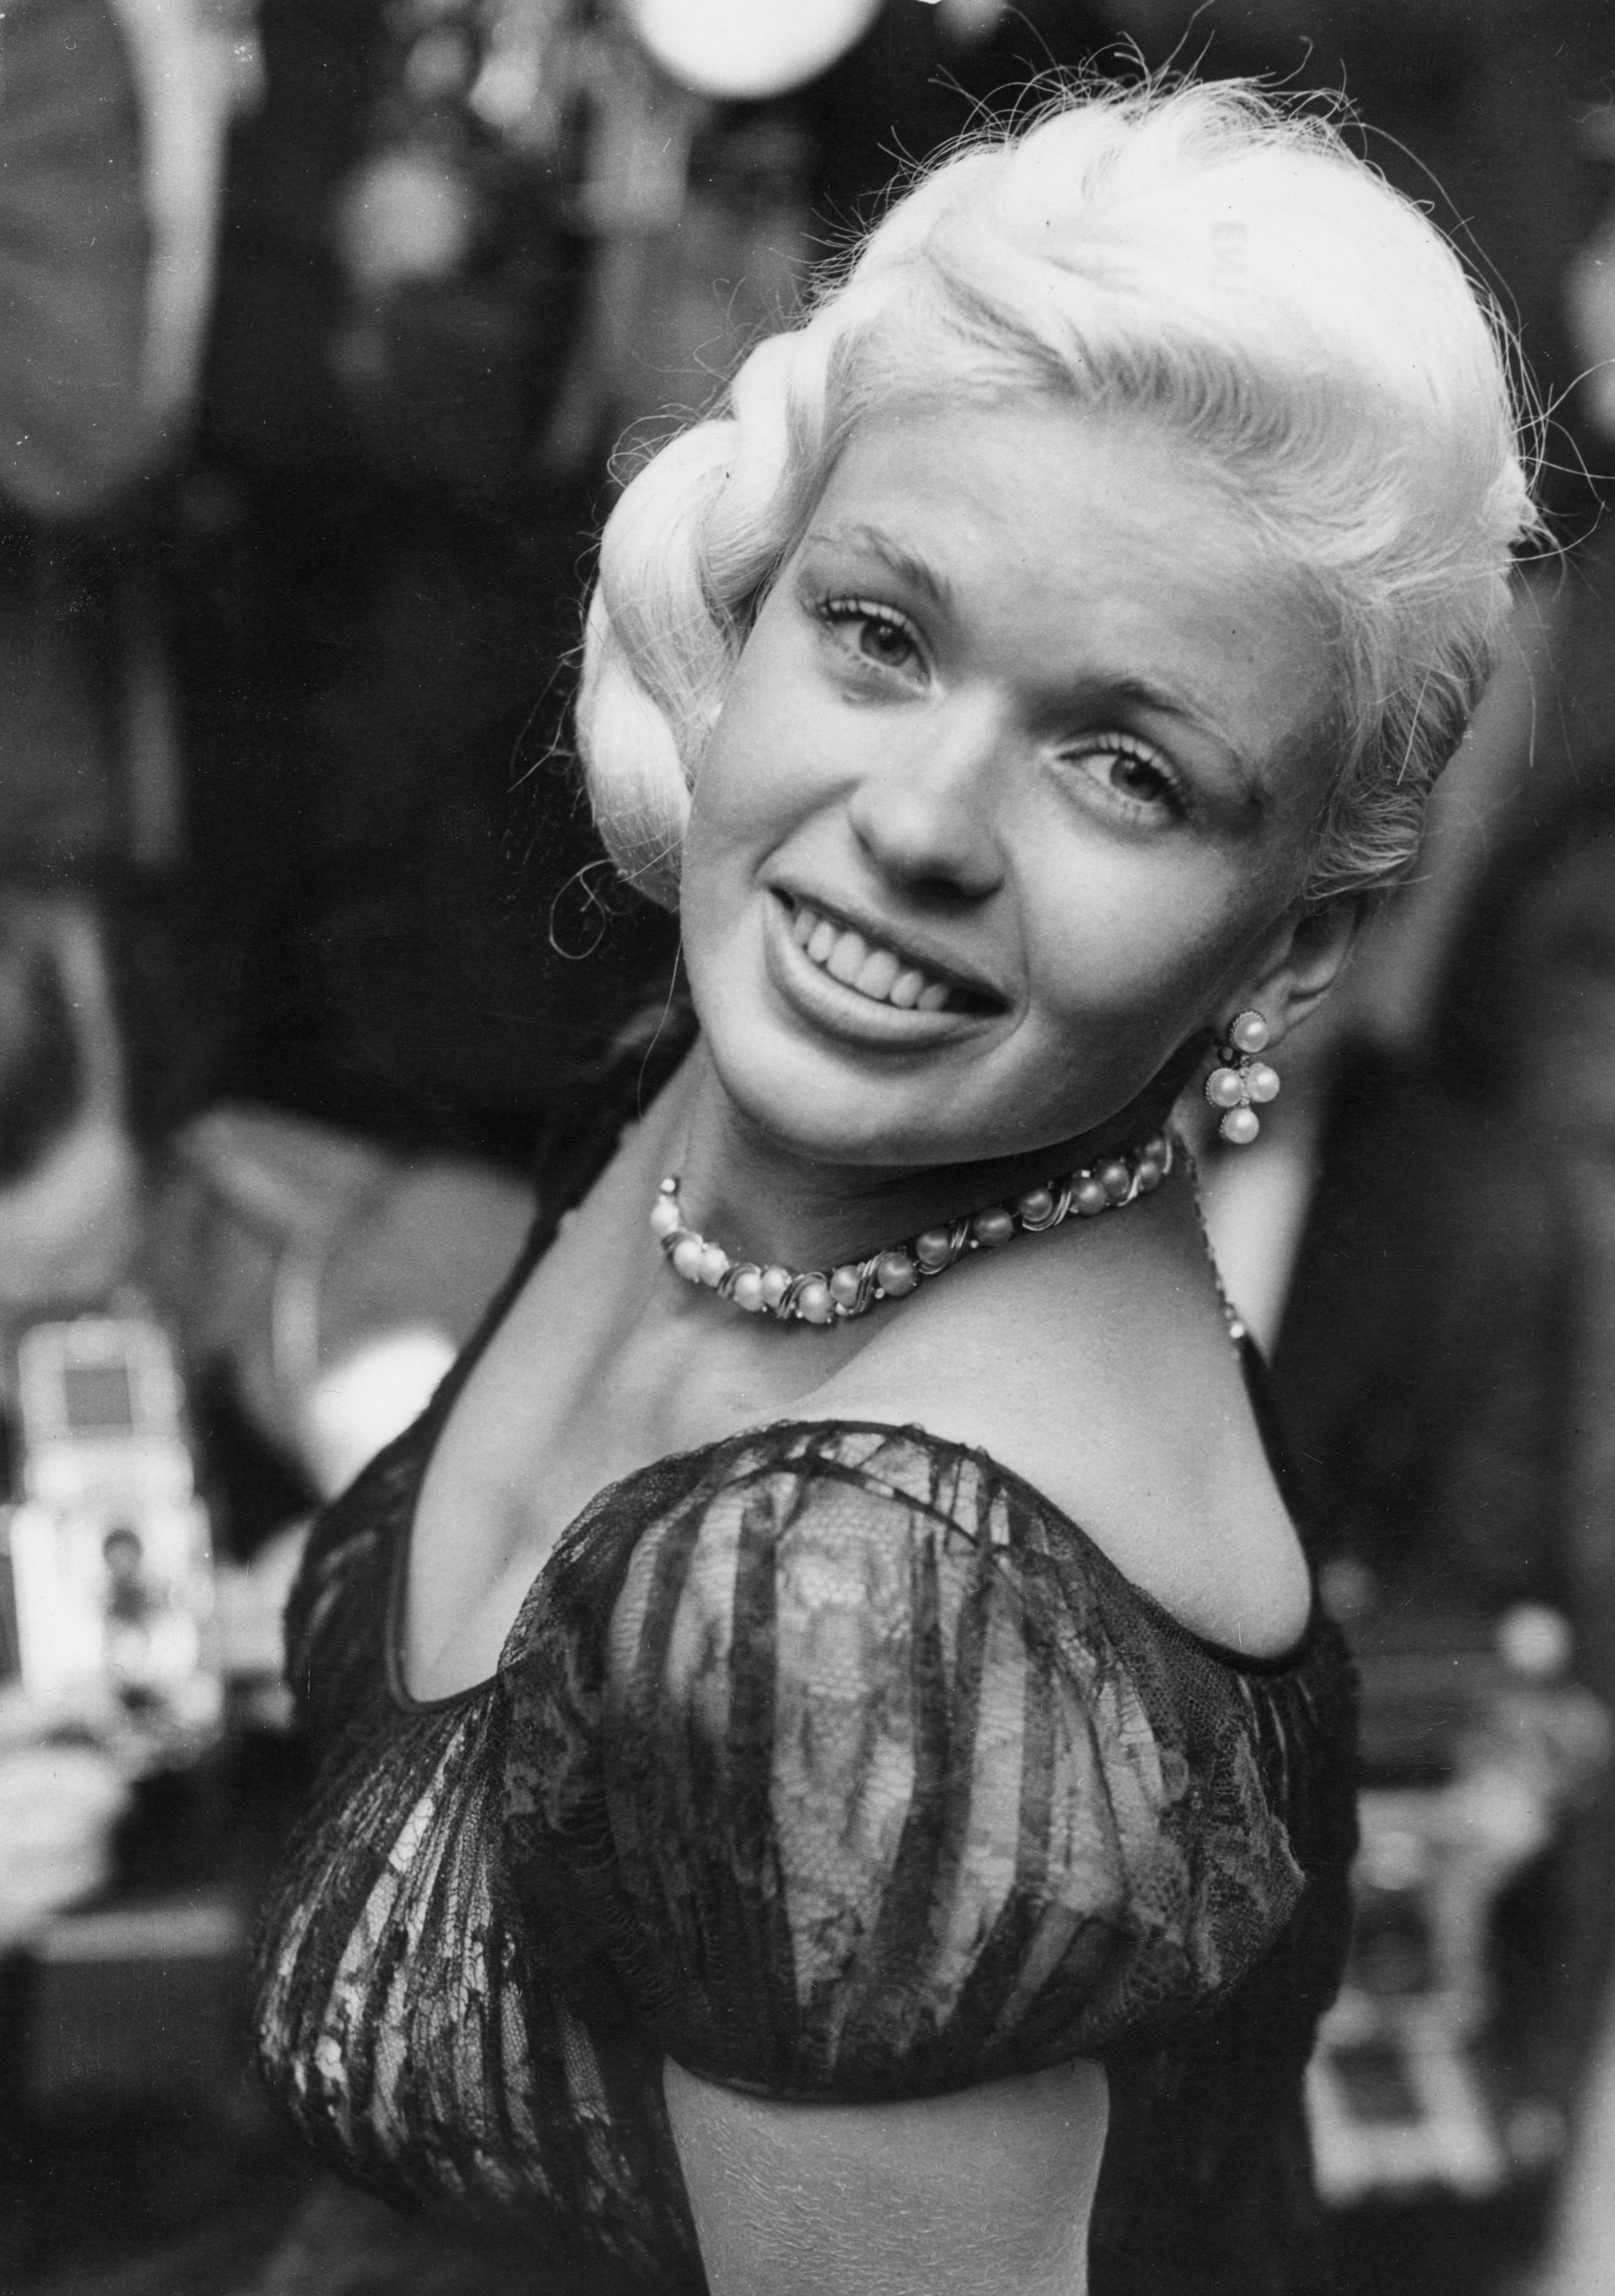 Hollywood bombshell Jayne Mansfield poses at the Dorchester Hotel in London on September 25, 1957 | Source: Getty Images